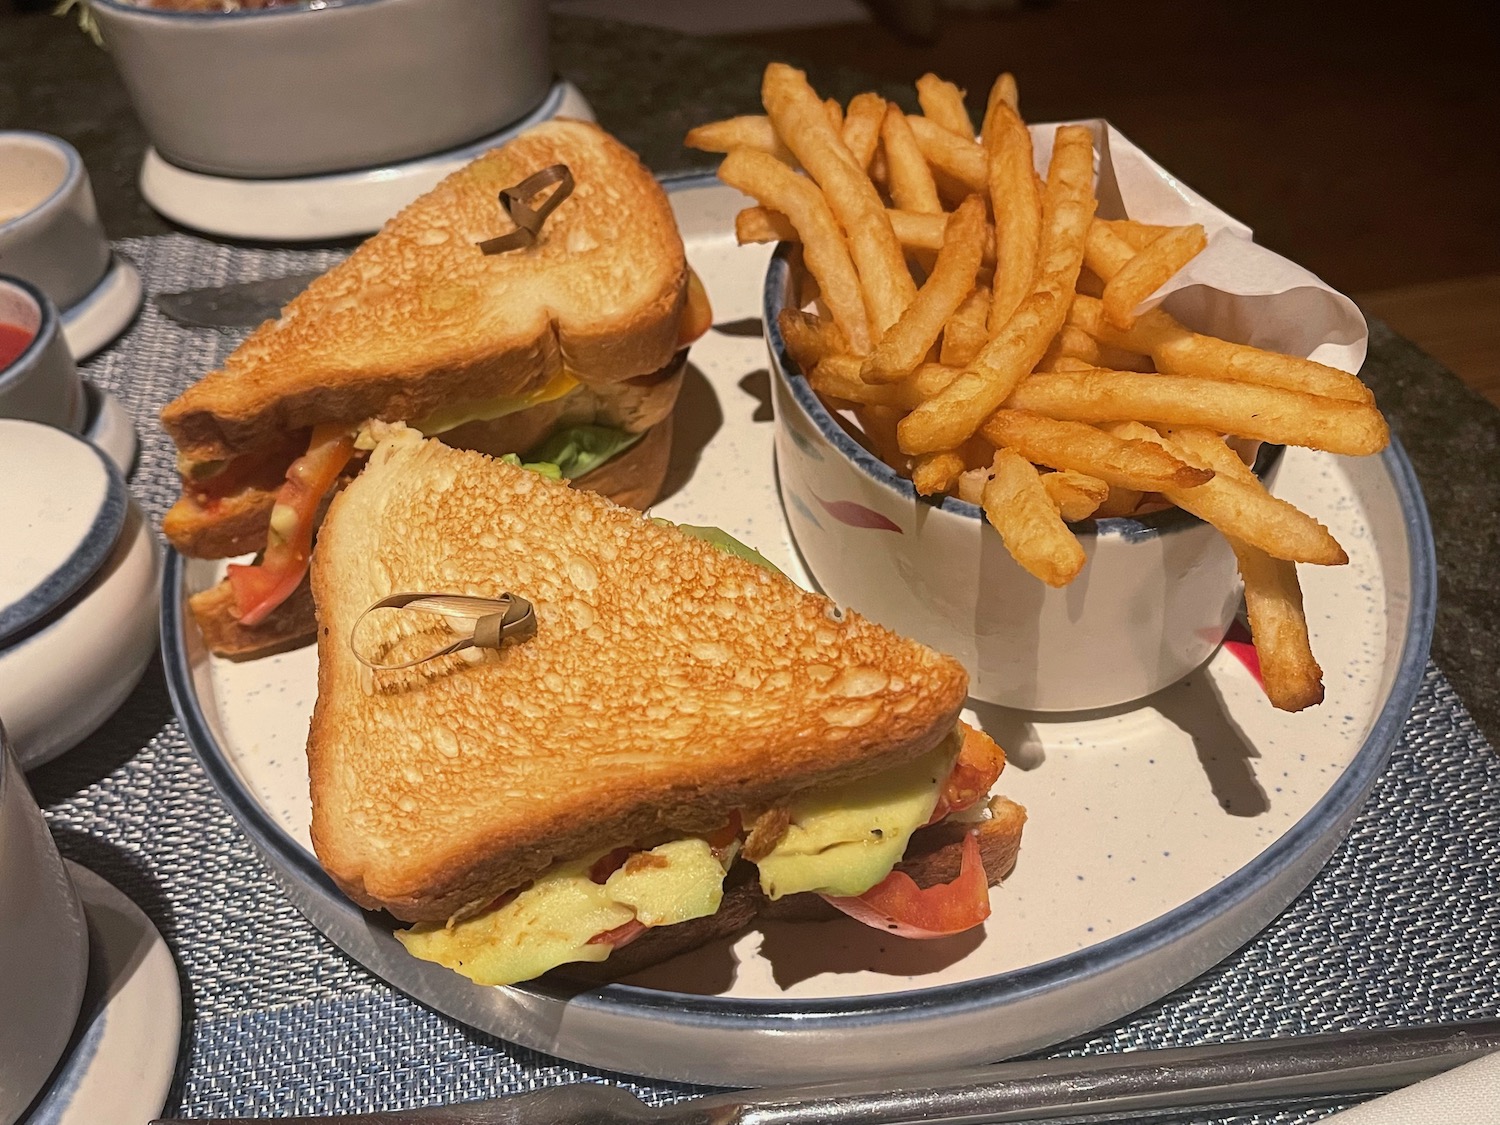 a plate of sandwiches and fries